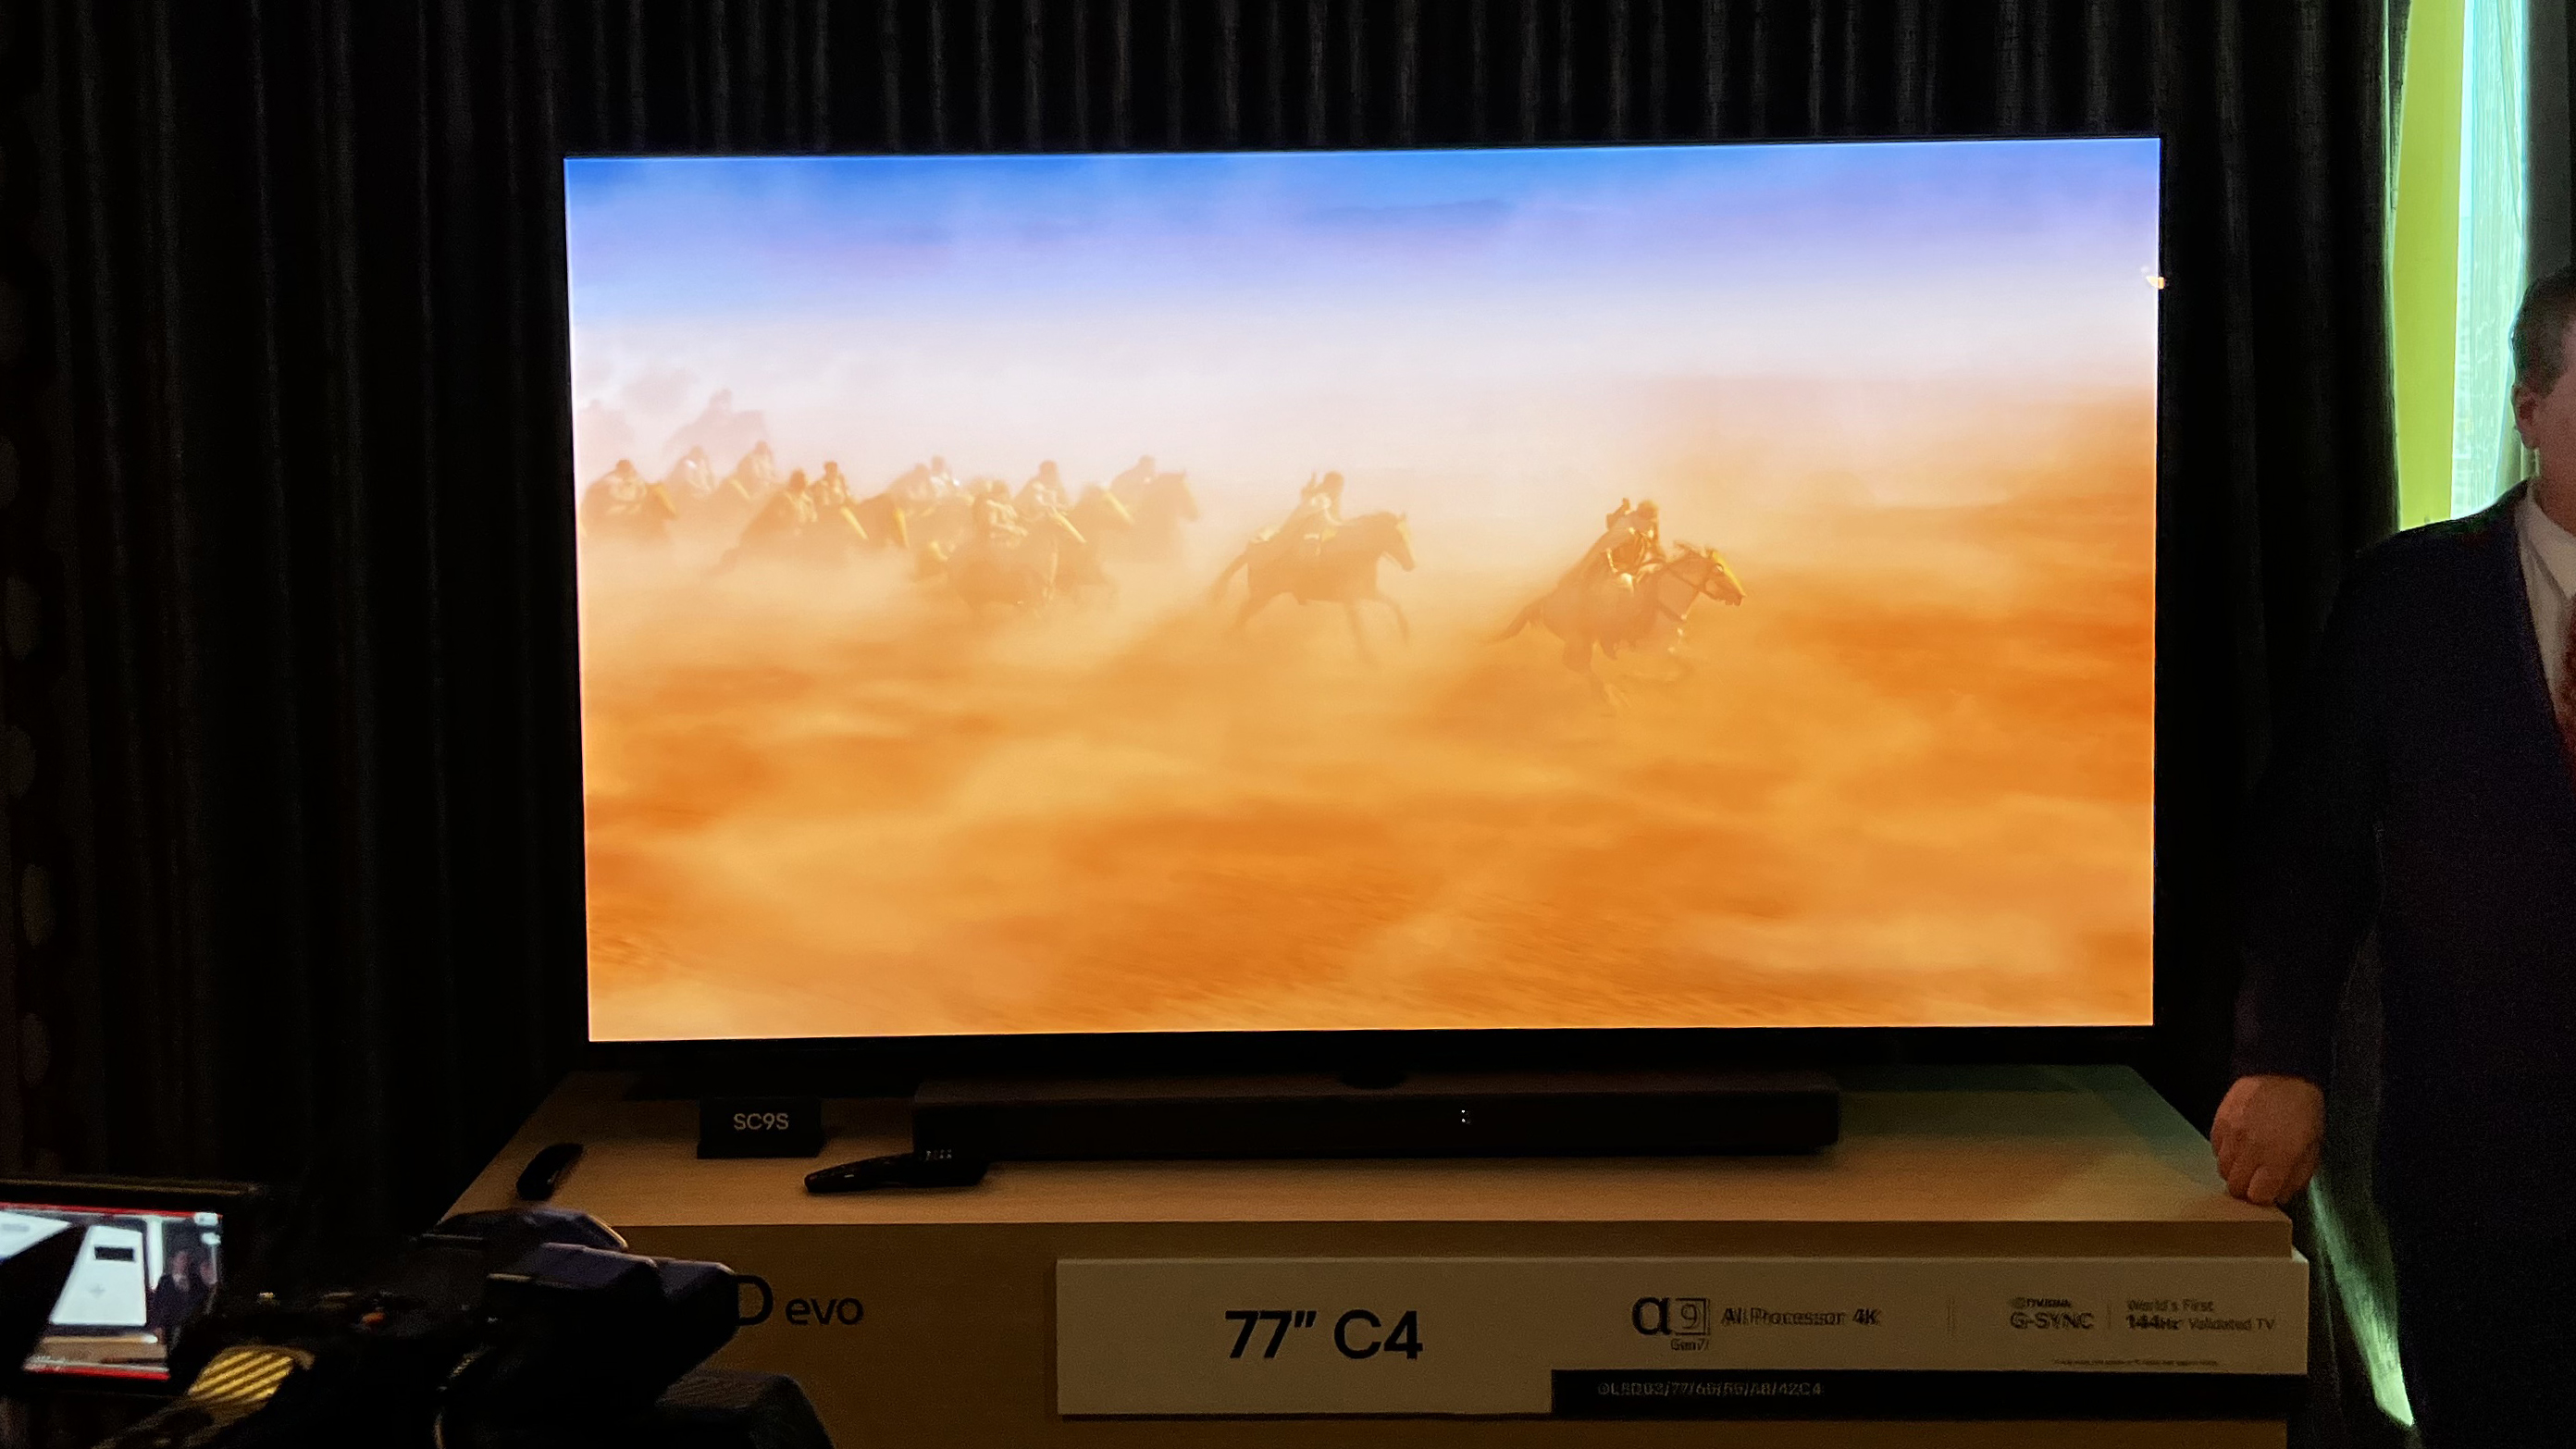 LG C4 TV demoing a movie in a hotel room